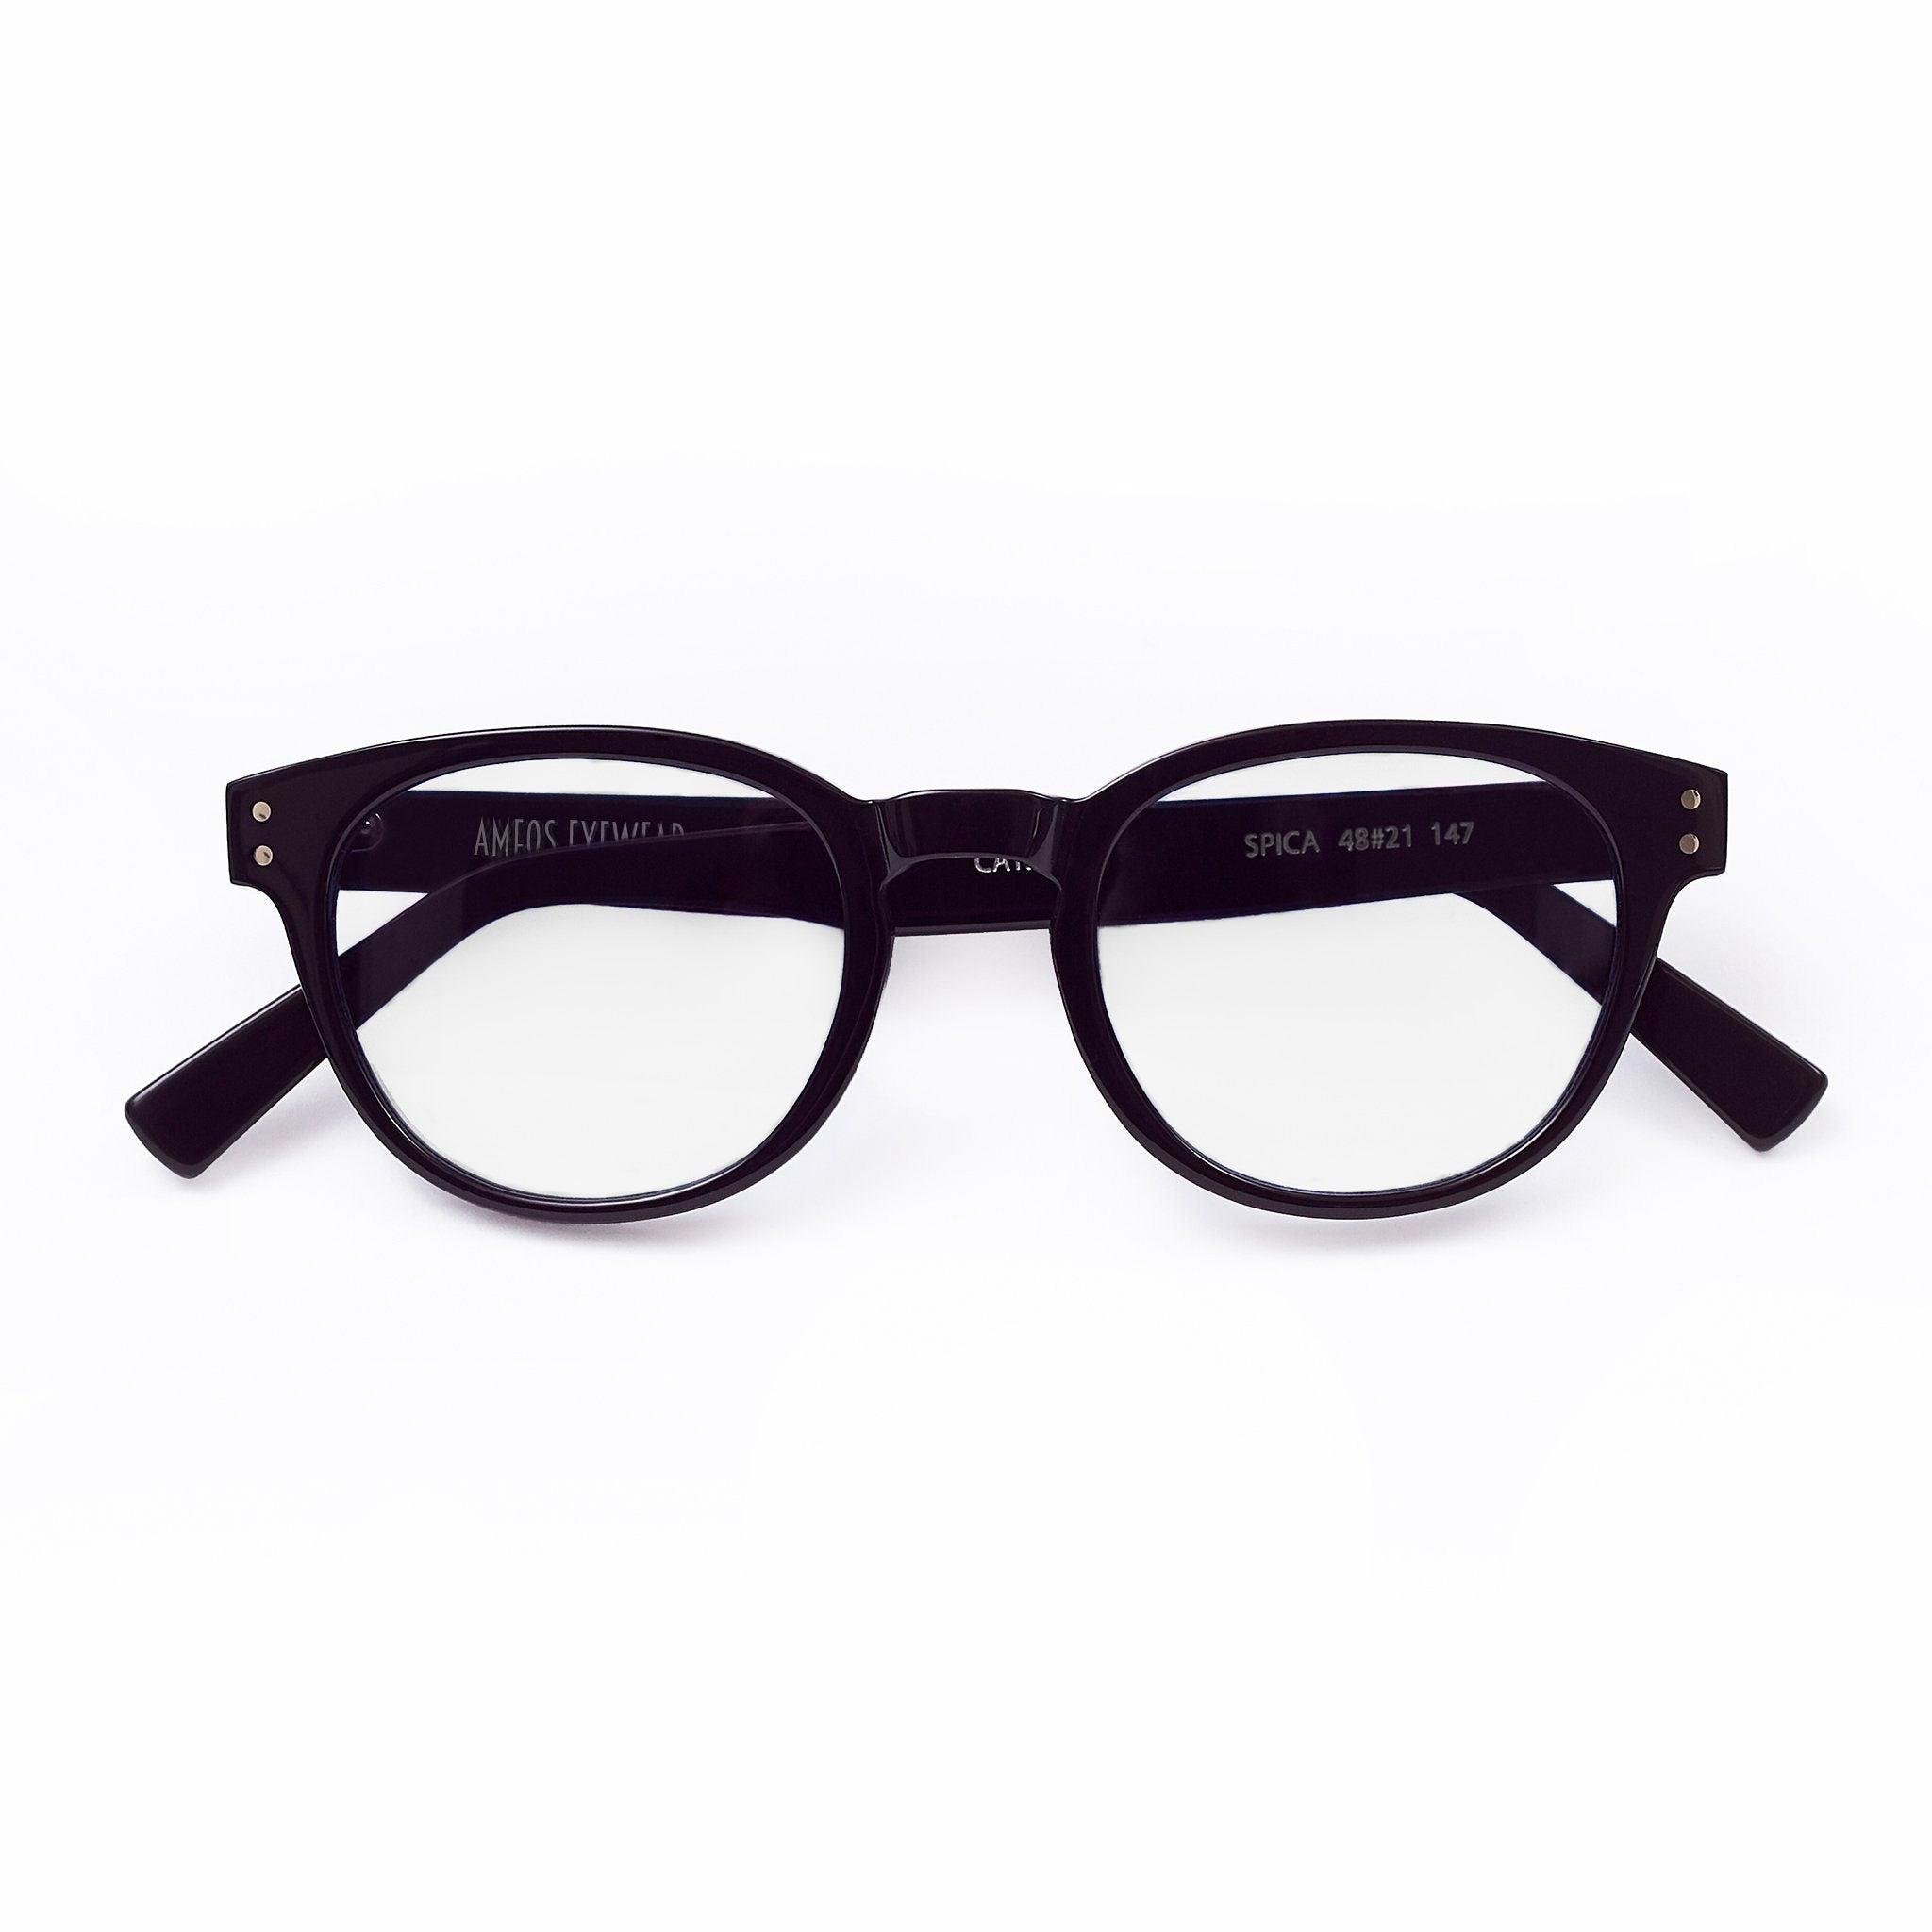 Ameos eyewear spica optical glasses in black frames, unisex and handmade in italy.